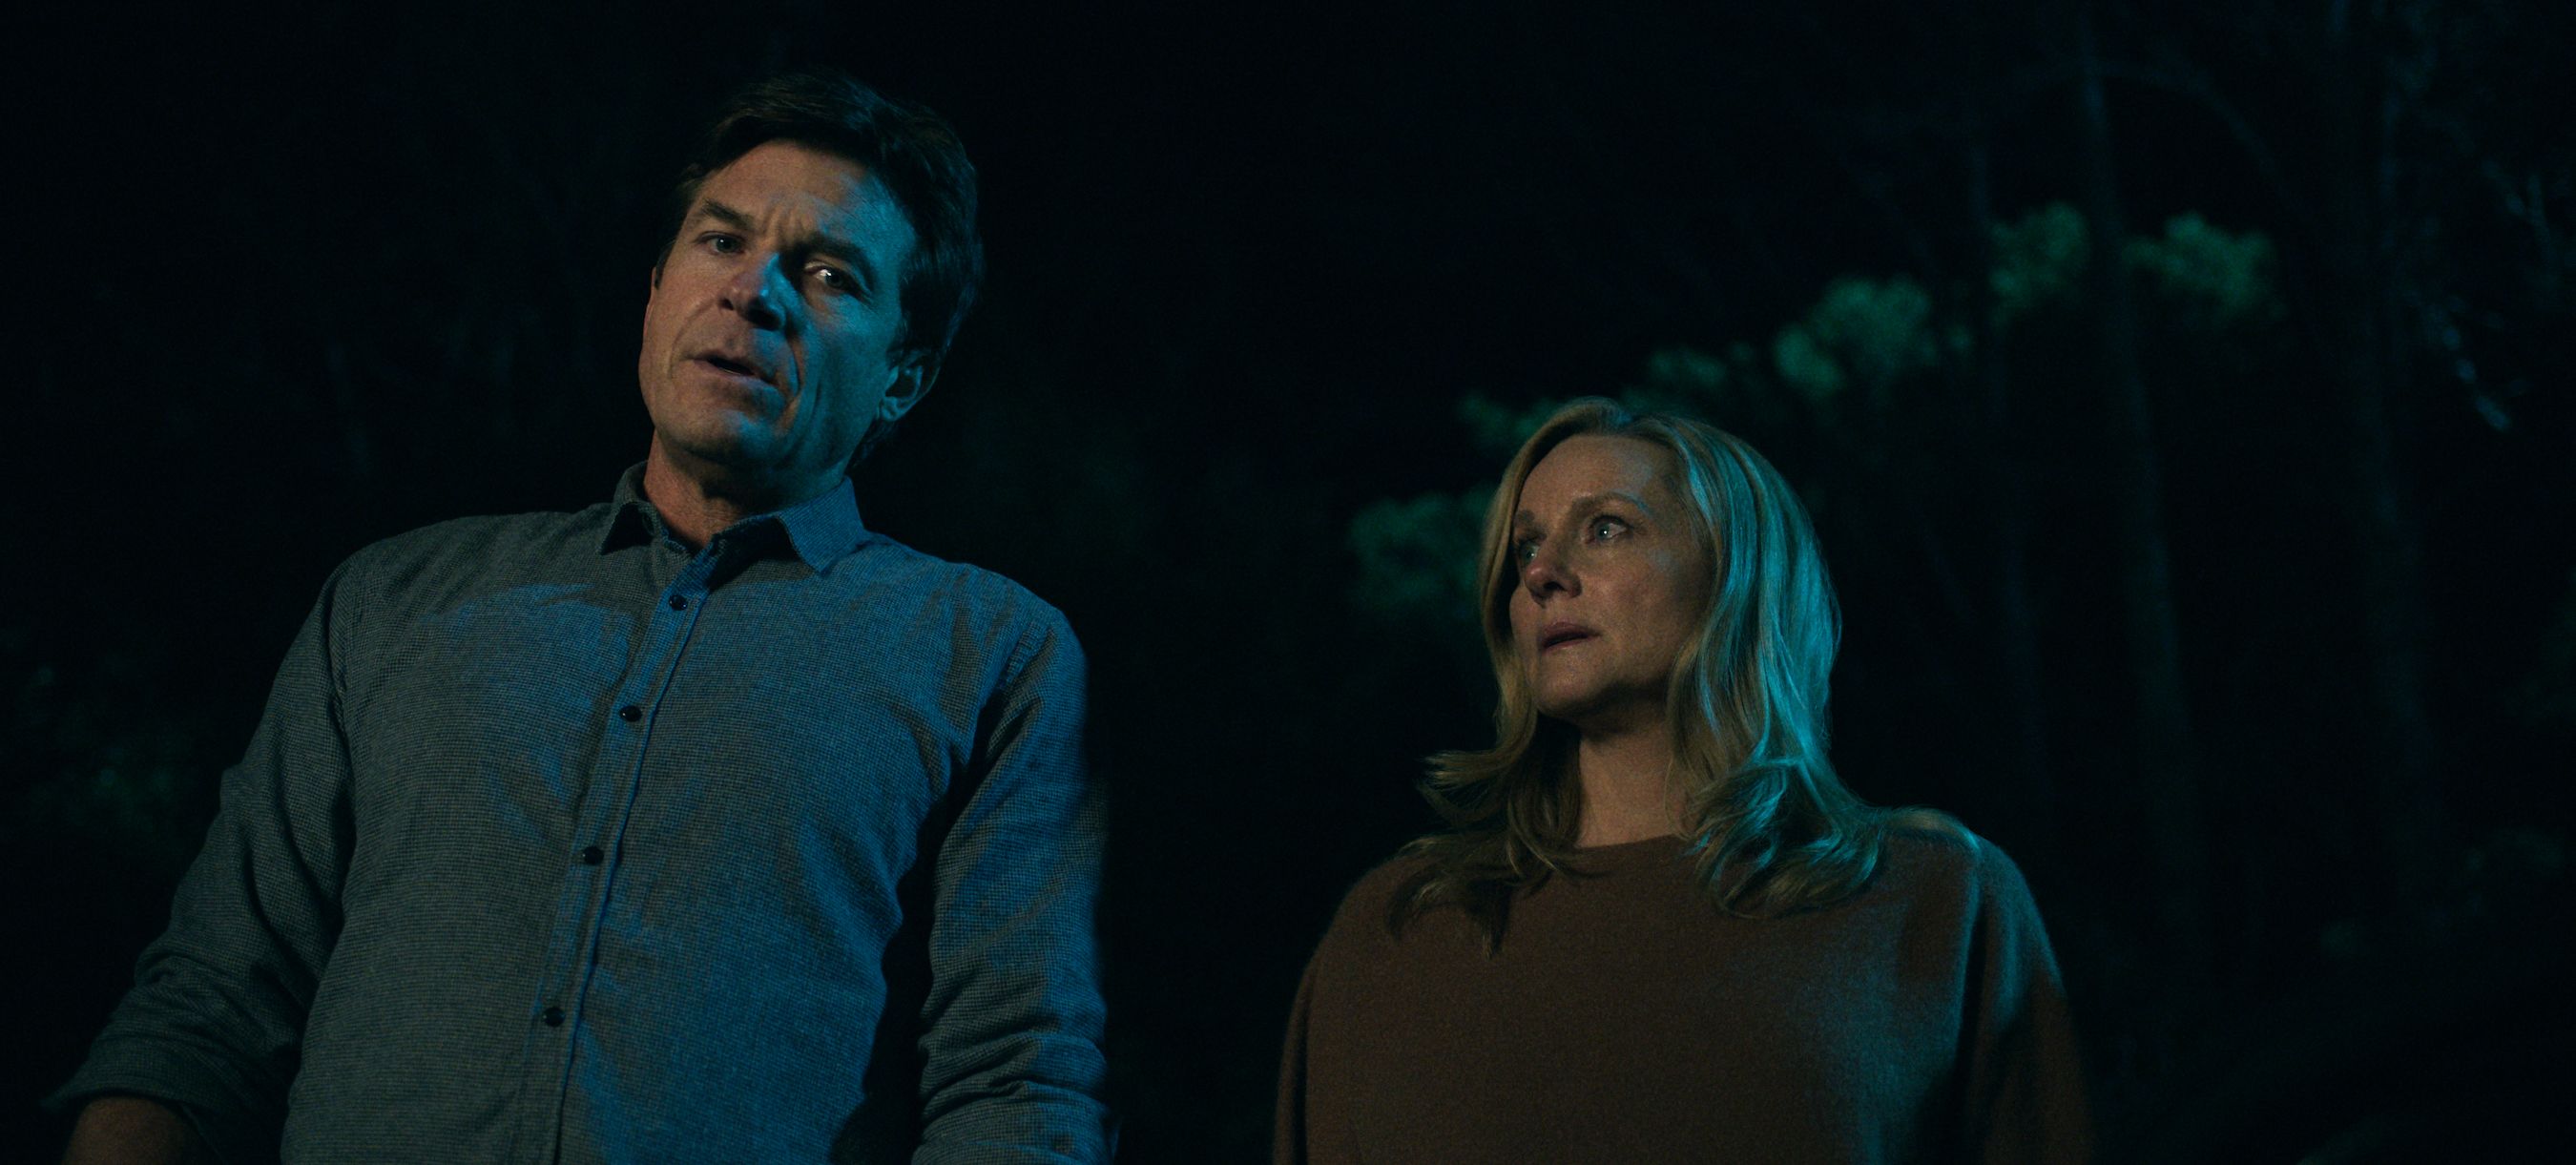 Ozark Season 4 Guide to Release Date, Cast News and Spoilers